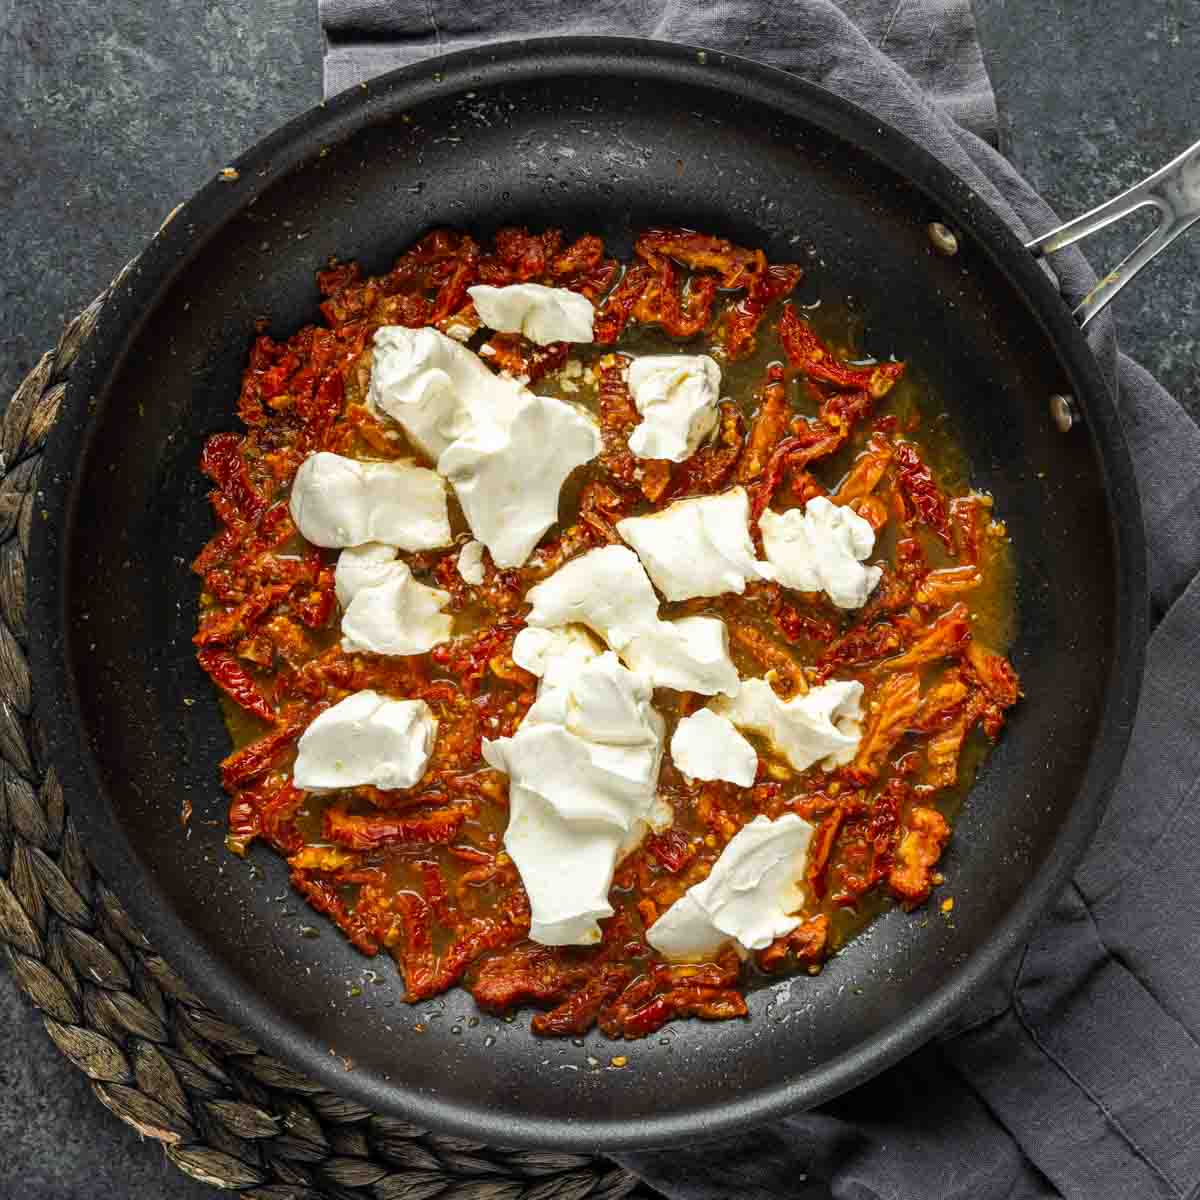 Tomato sauce with dollops of cheese in a frying pan for Chicken Florentine Casserole